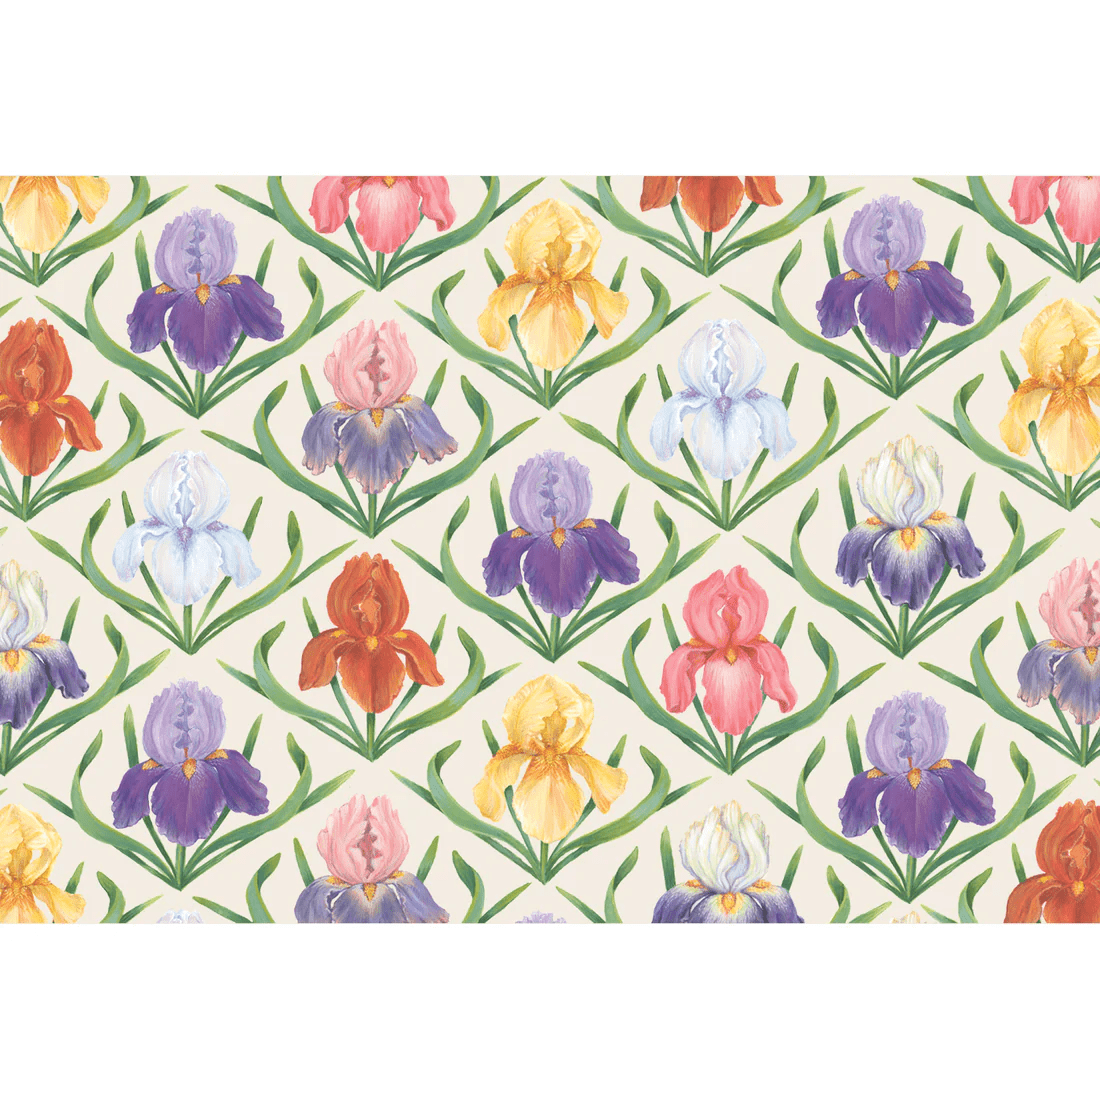 Field of Irises Placemat – 24 Sheets | Hester & Cook | Iris Gifts & Décor